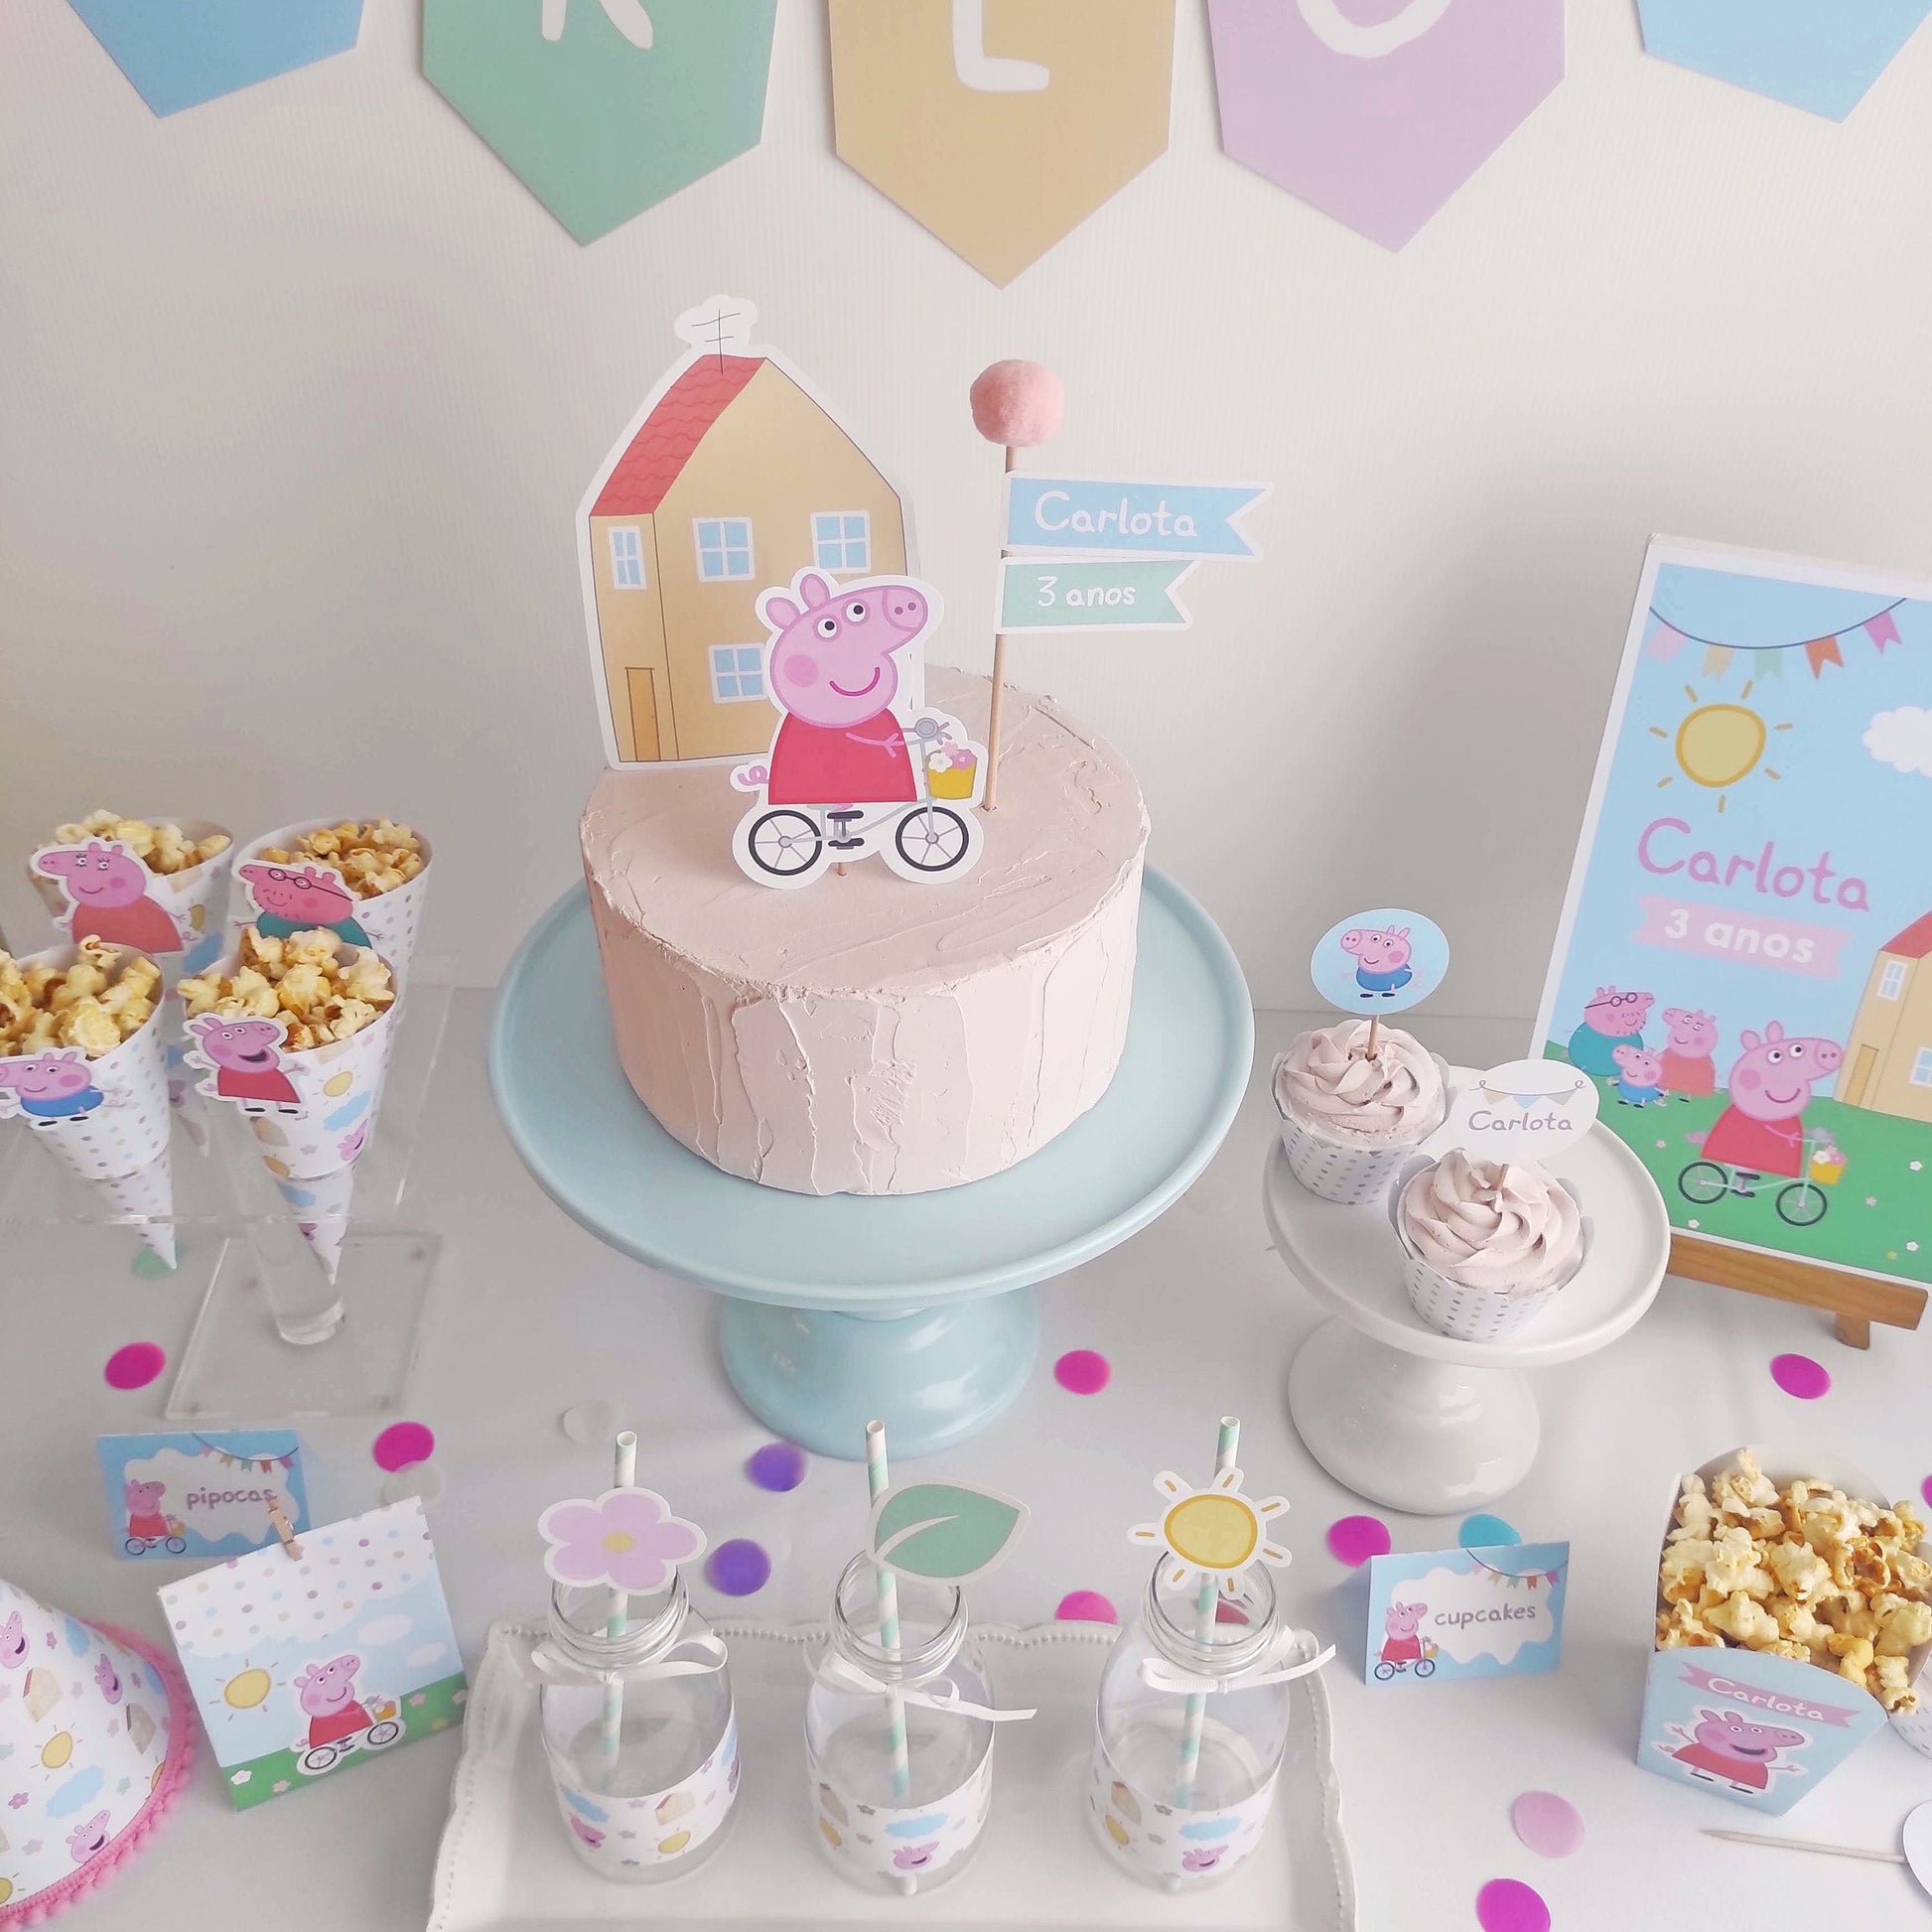 Editable Peppa Pig Birthday BUNDLE | Printable Peppa Pig Birthday Decorations  This bundle of printables is designed to bring the fun and ease of a professional party to your home, with quick and easy editing and printing.